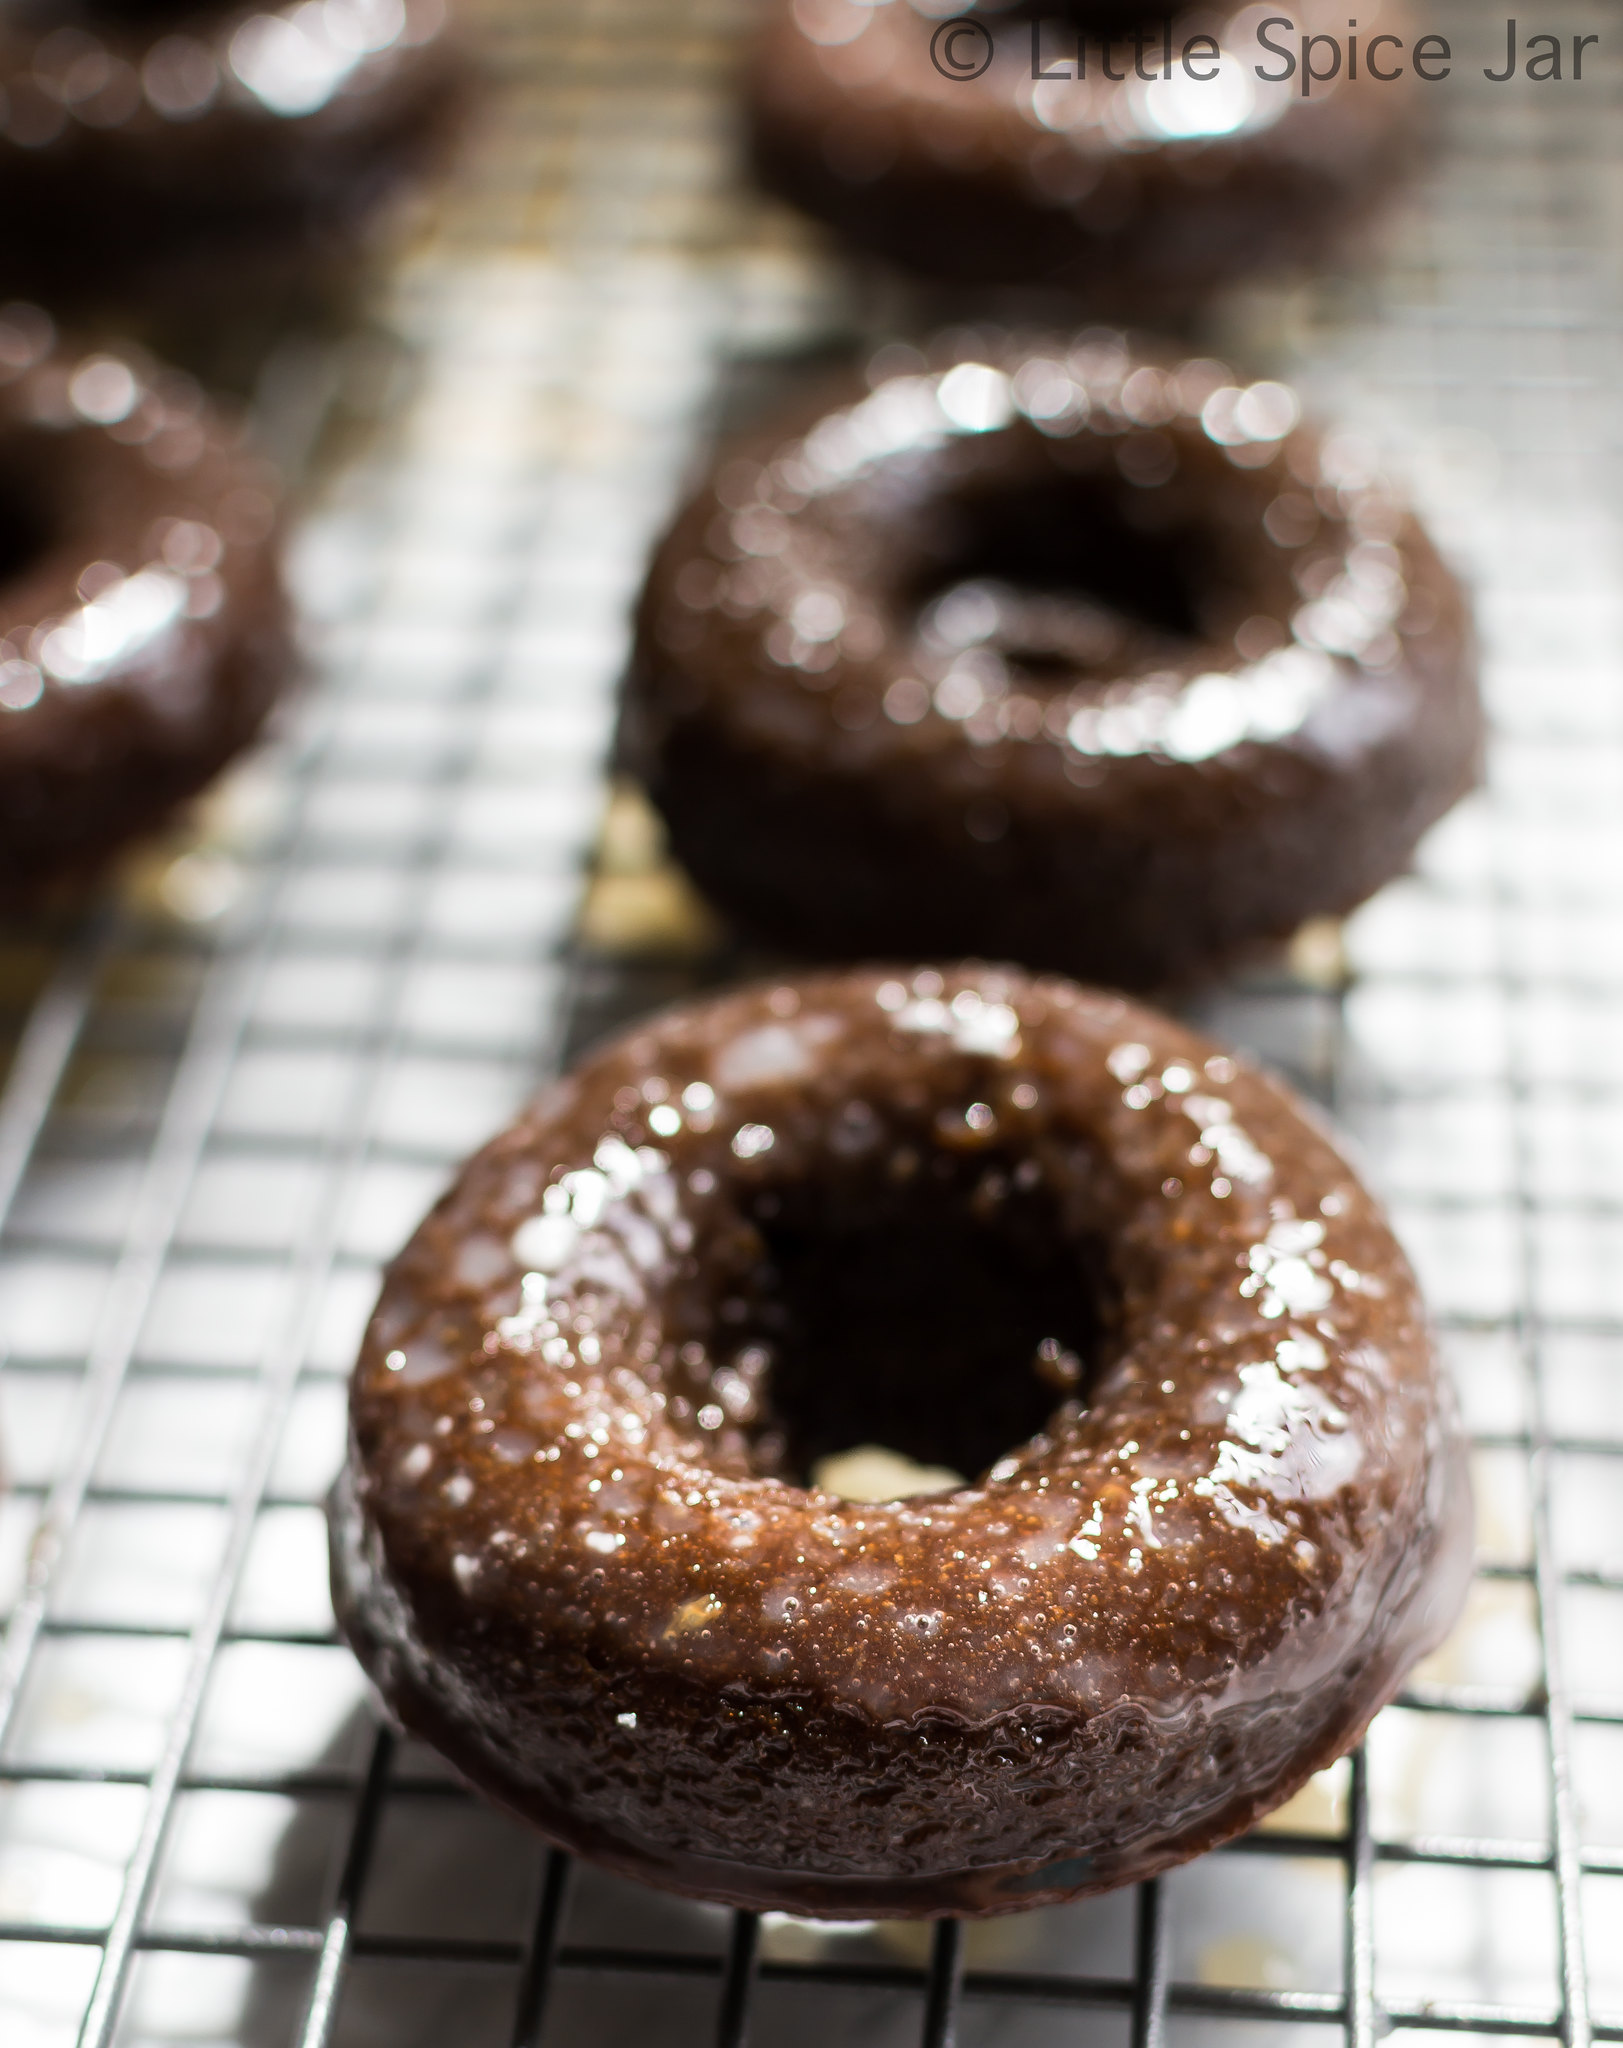 baked and glazed chocolate donuts on wire rack